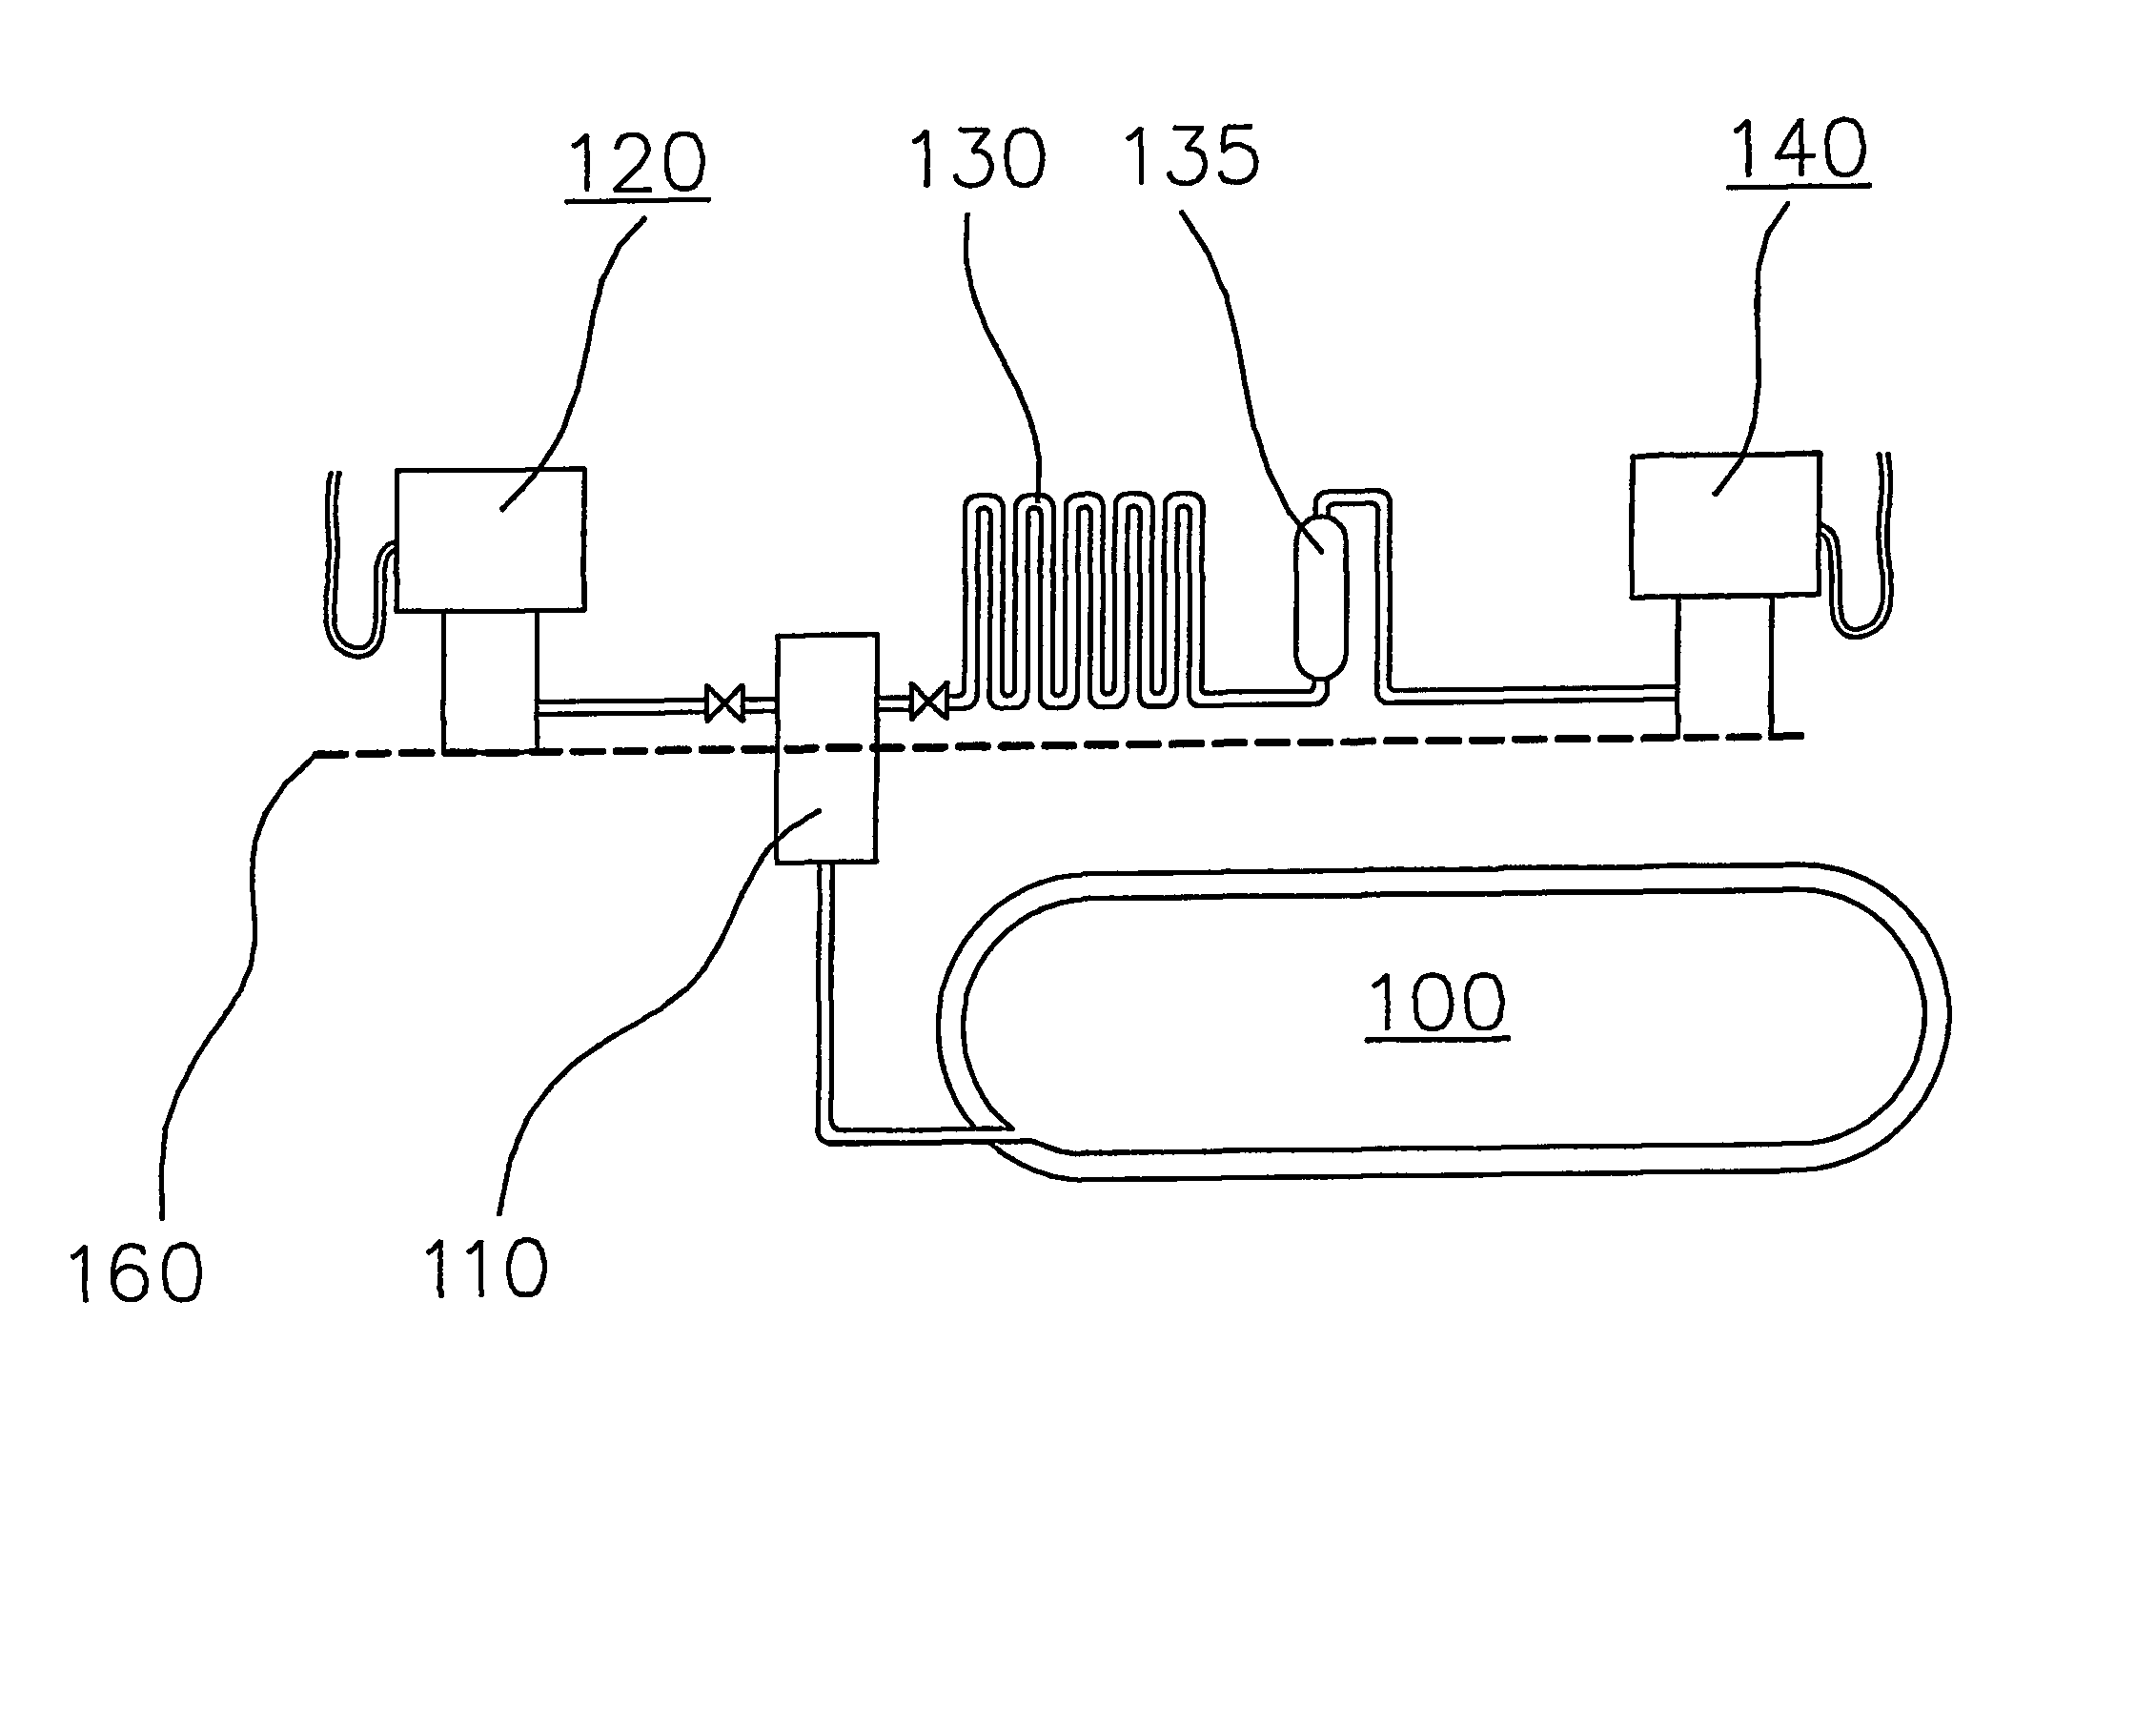 Combined liquefied gas and compressed gas re-fueling station and method of operating same